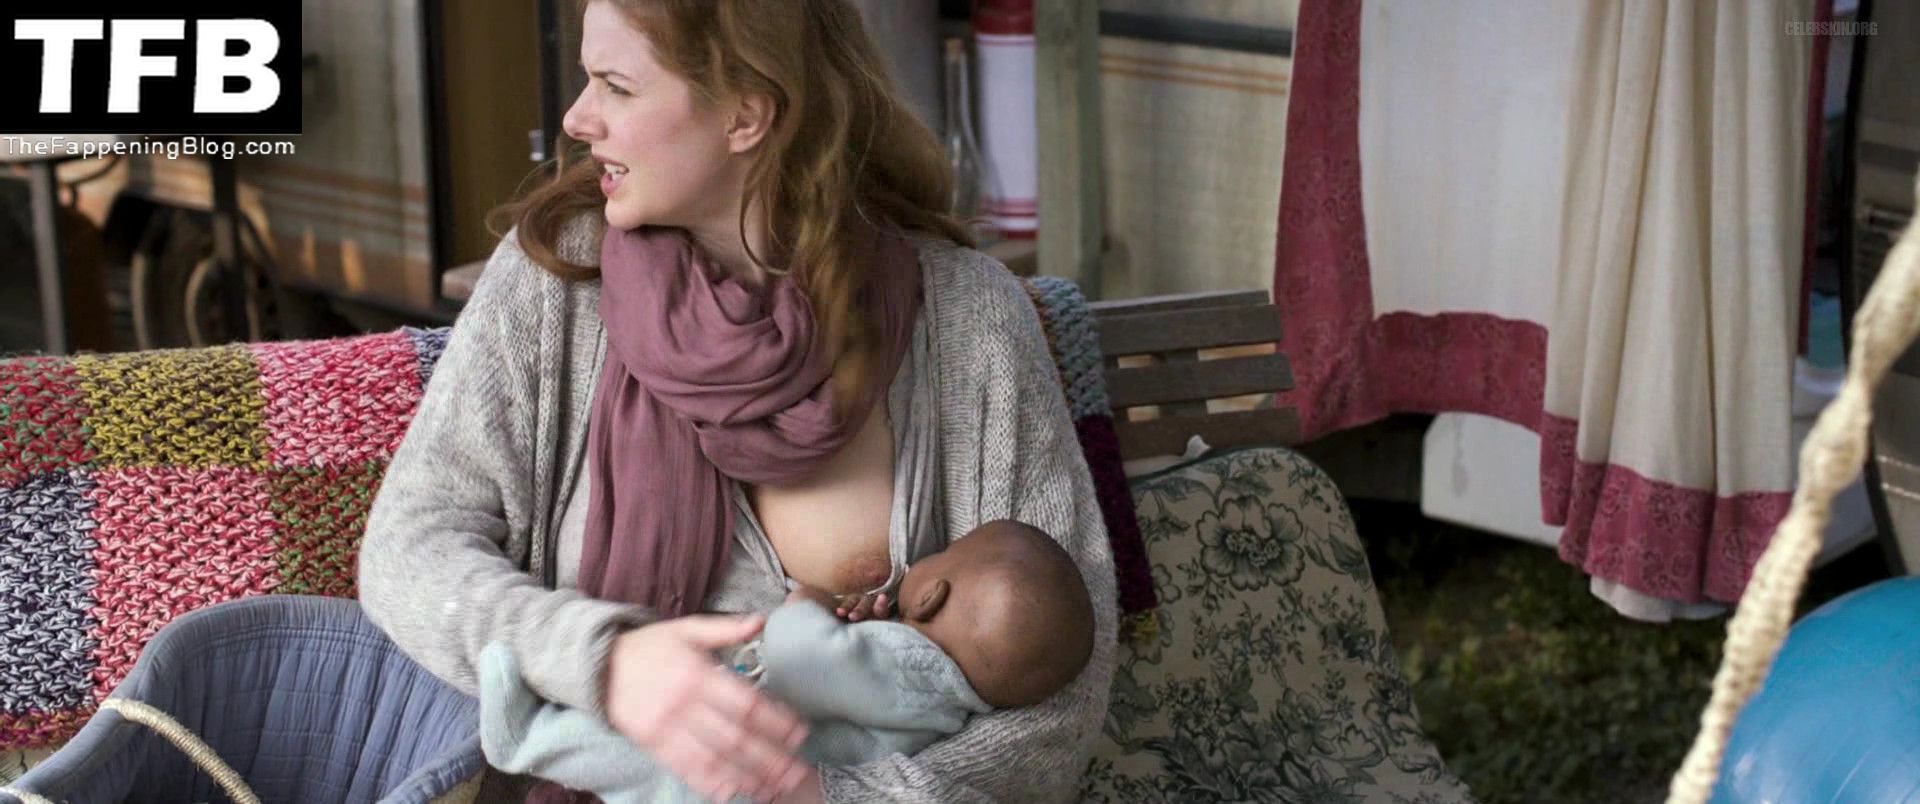 Rachel Hurd Wood Nude And Collection 9 Photos Thefappening